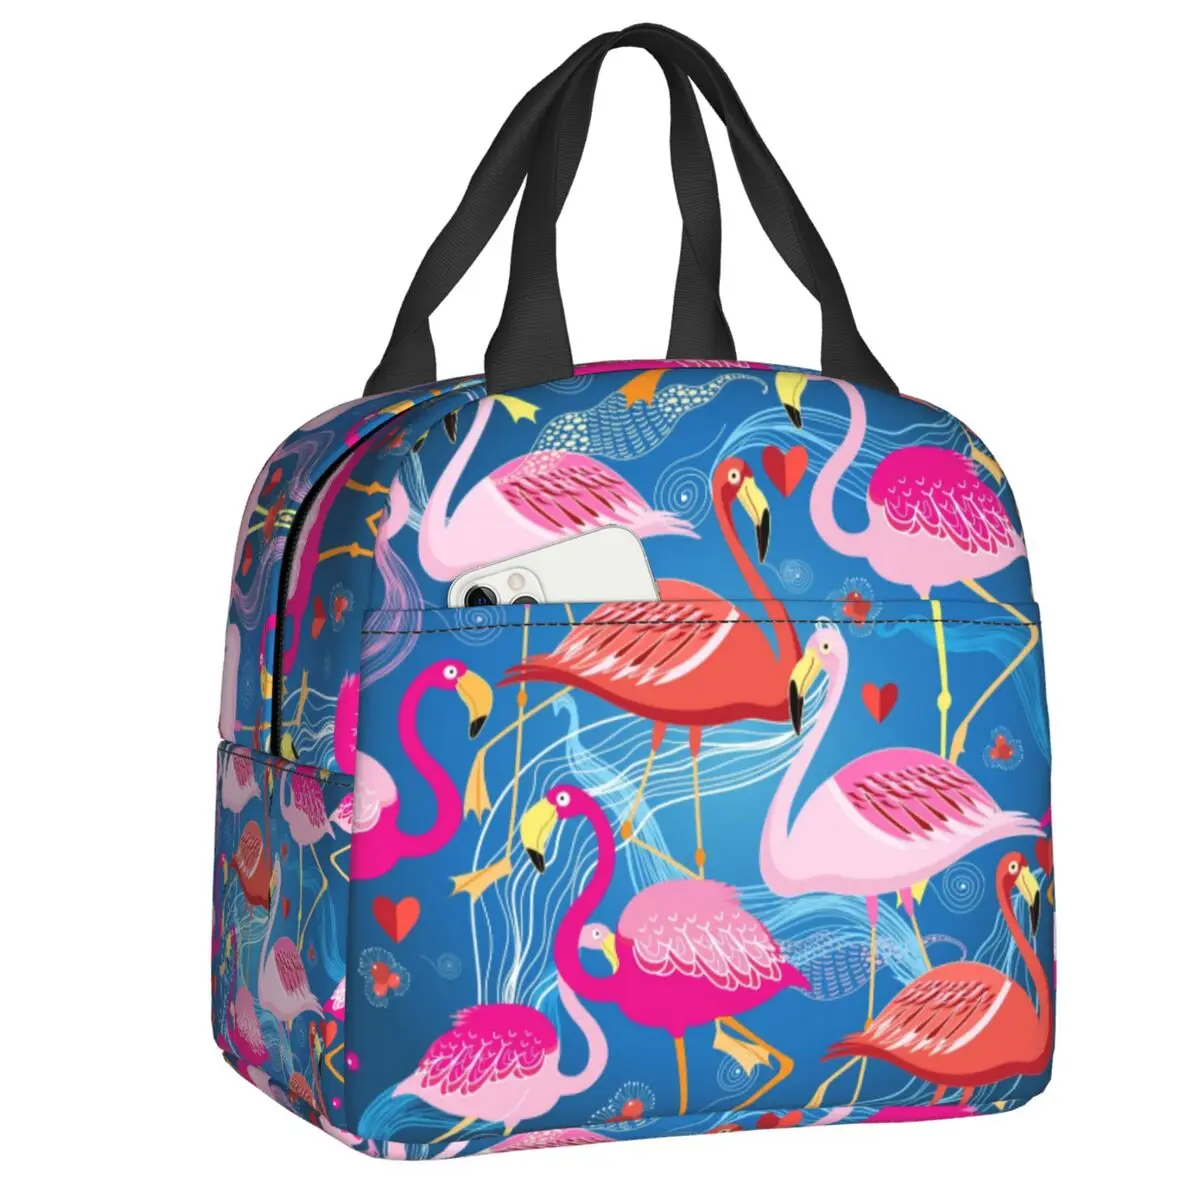 

Fashion Flamingo Birds Insulated Lunch Tote Bag for Women Flowers Pattern Portable Thermal Cooler Food Lunch Box for School